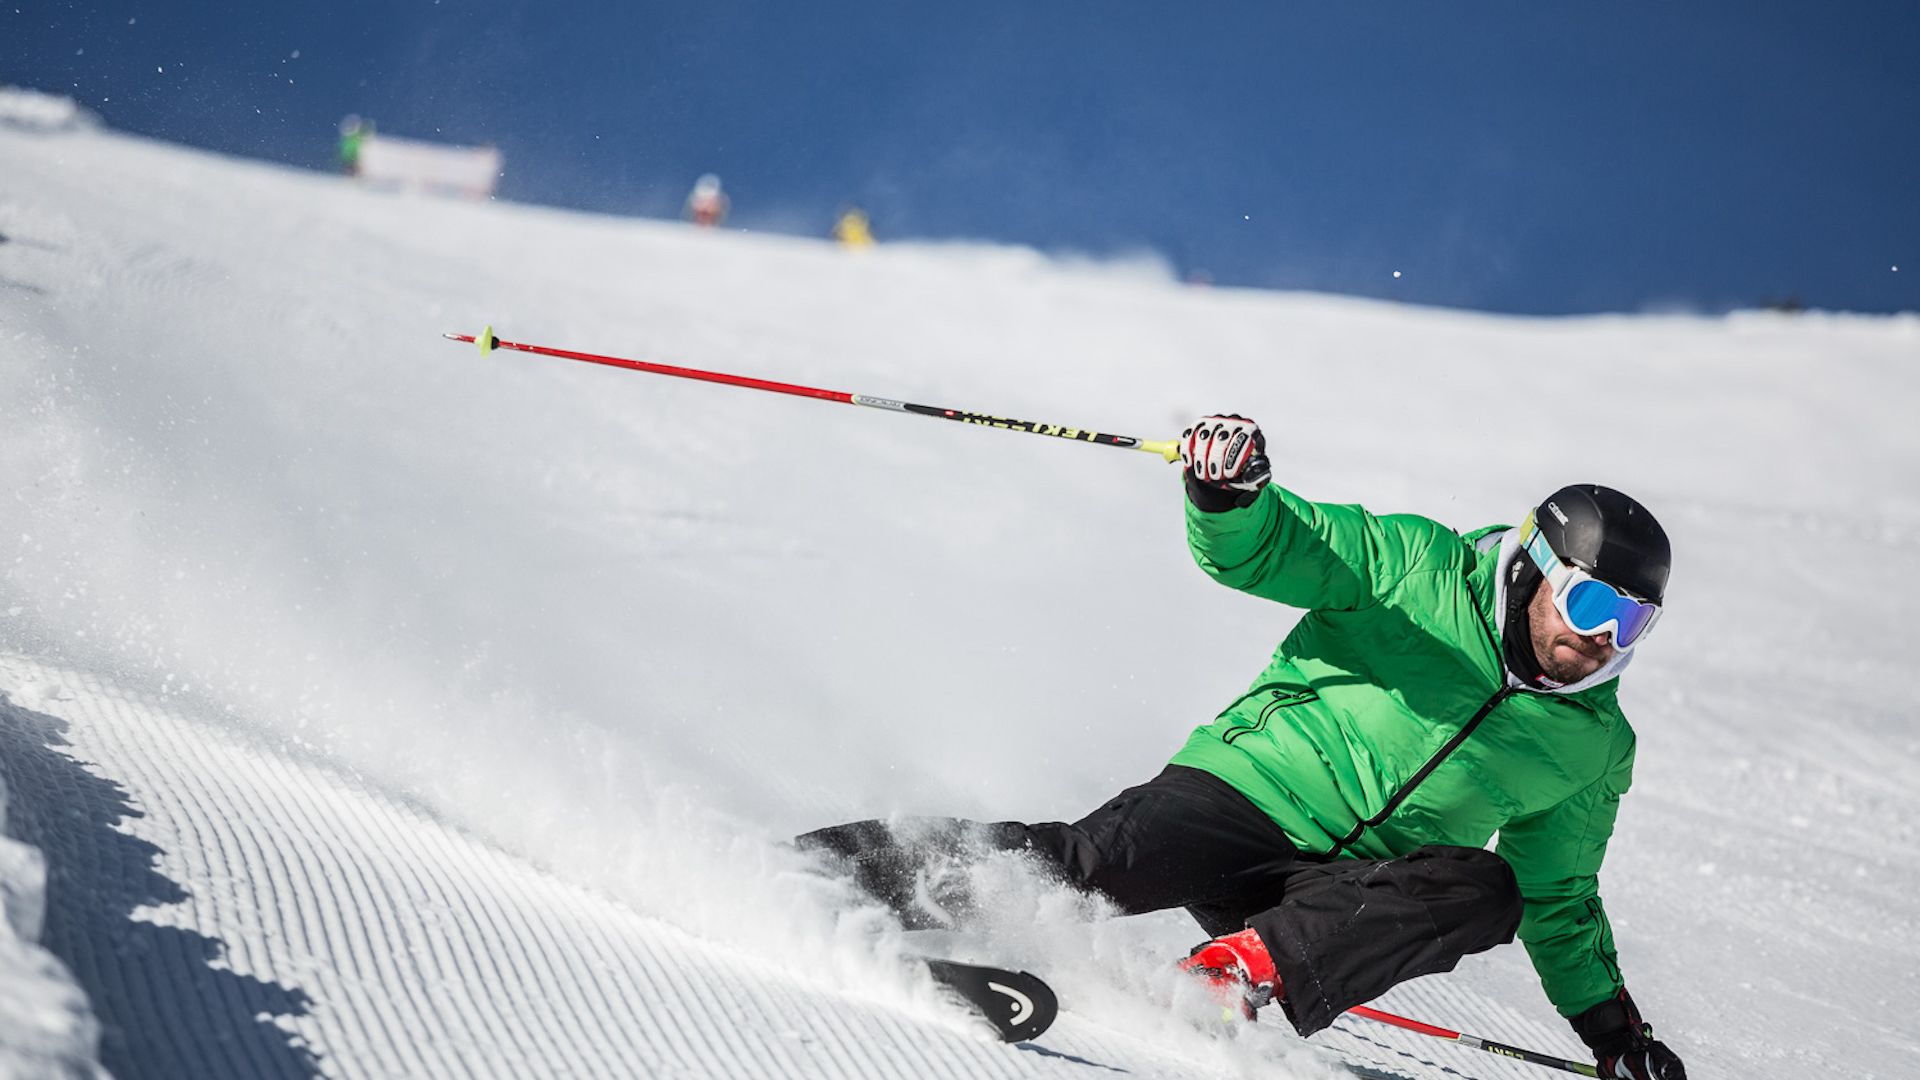 A Skier Going Down A Slope